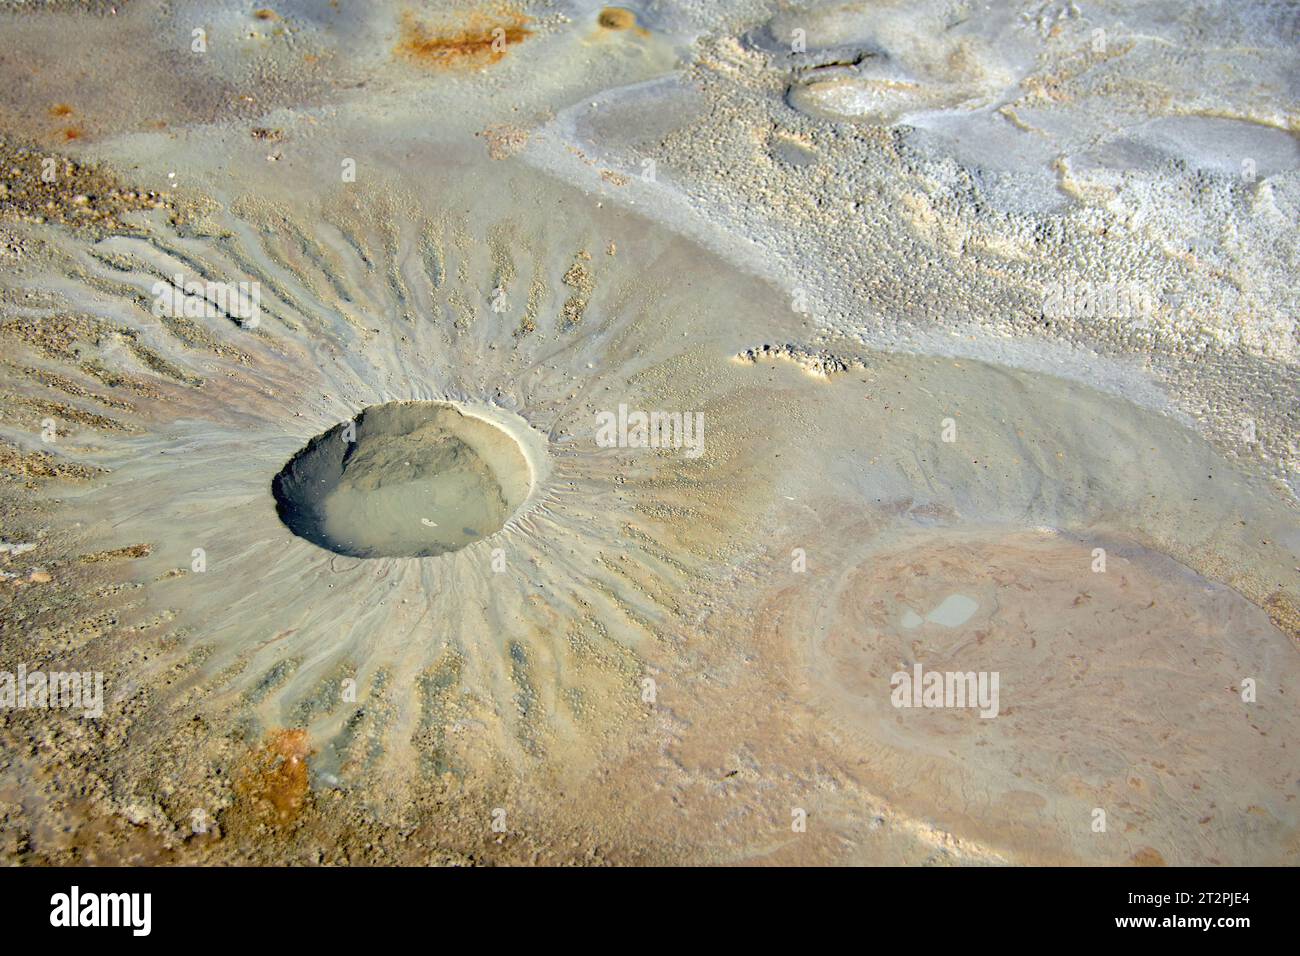 cones of mud volcanoes from which rivers of mud flow Stock Photo